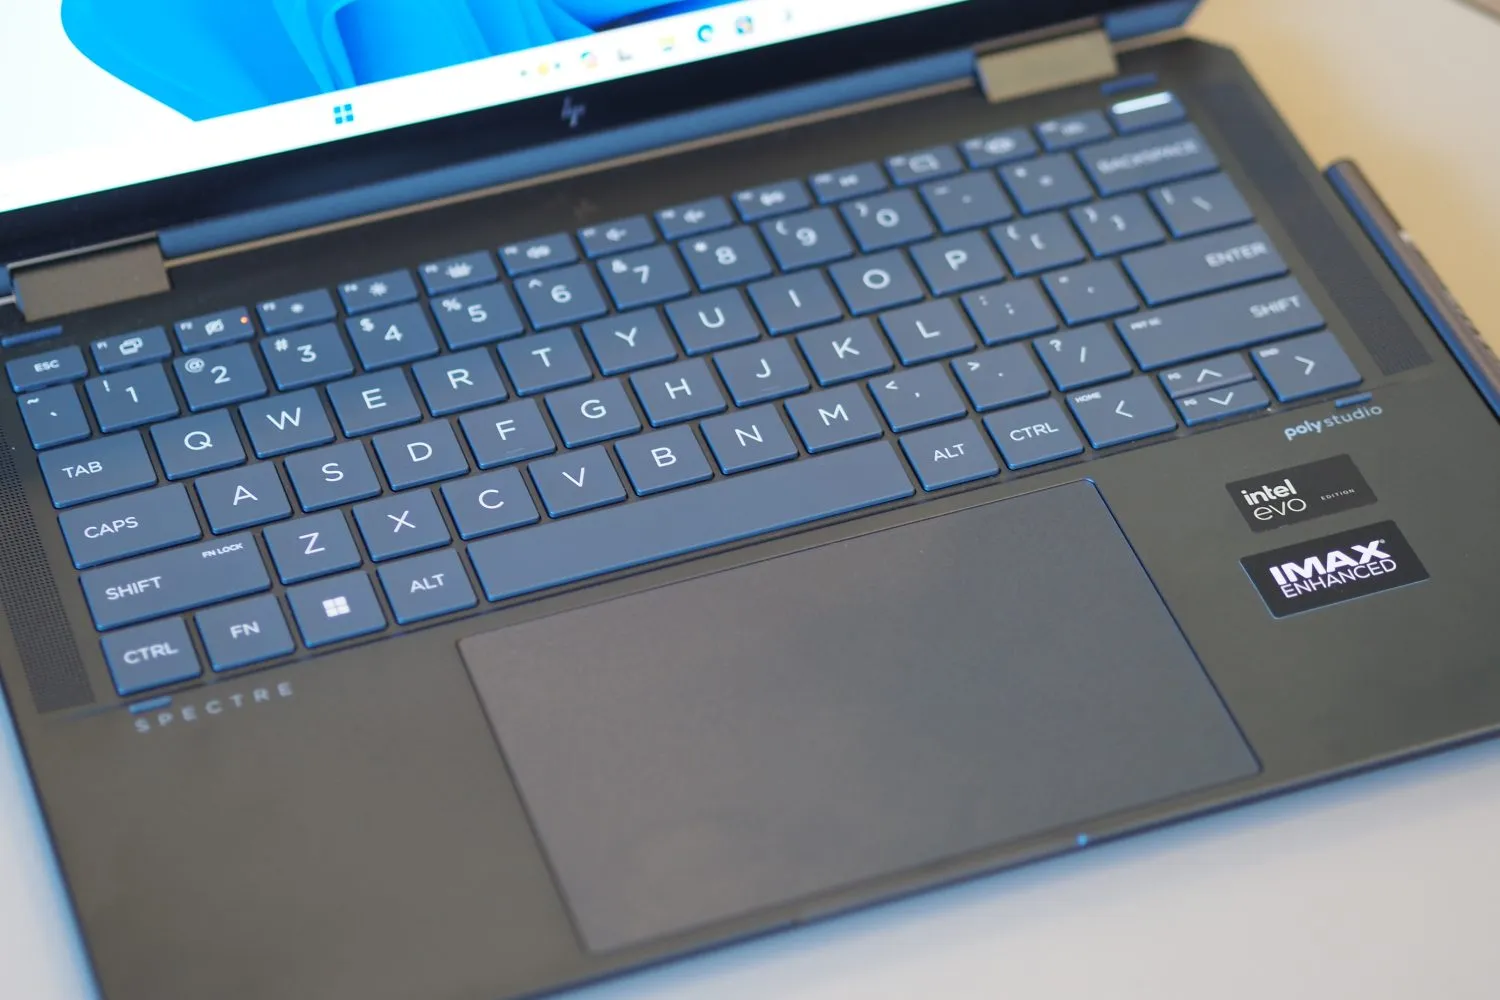 HP Spectre x360 14 2023 top-down view showing the keyboard.